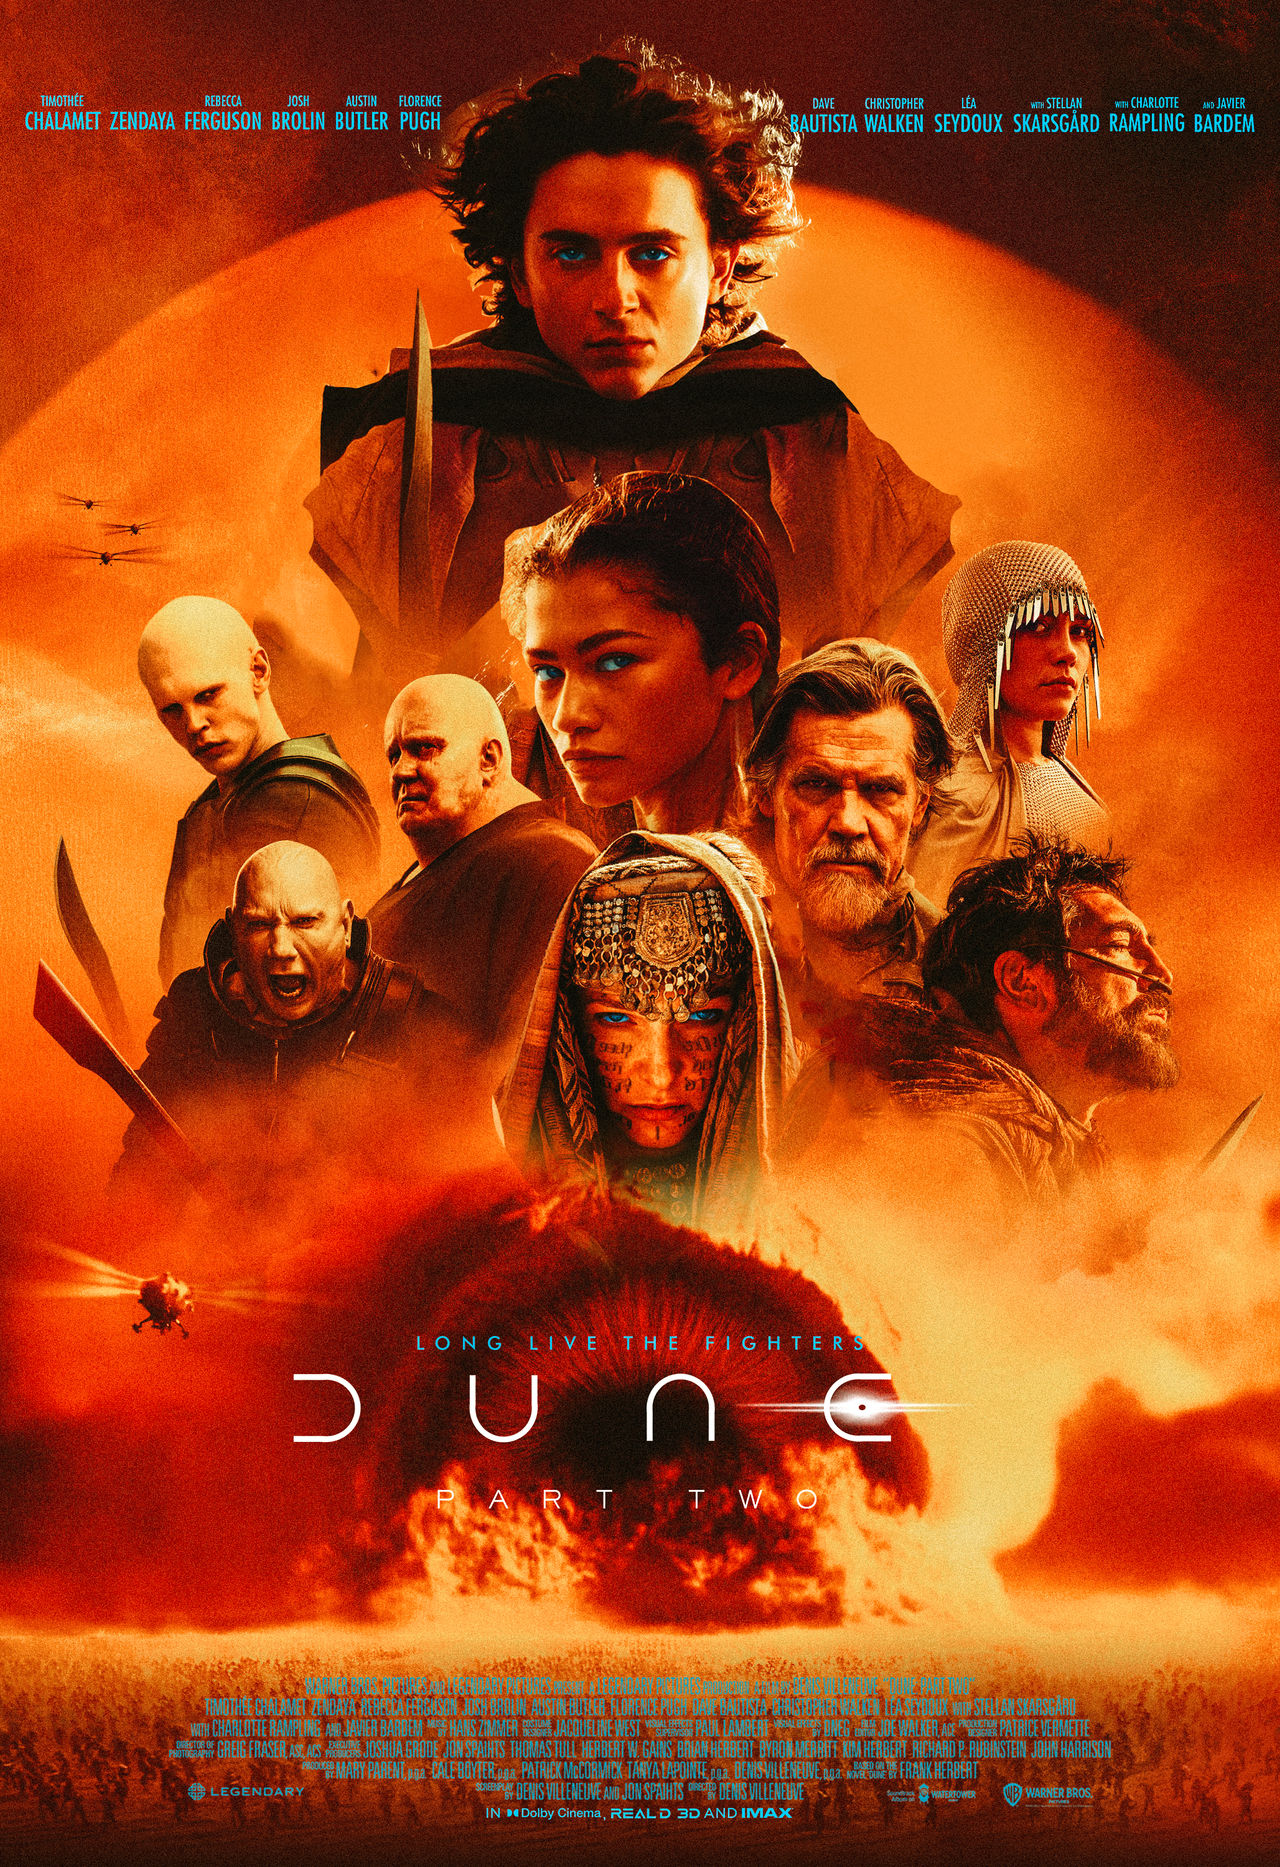 Dune-part-2-poster-fixed by Andrewvm on DeviantArt